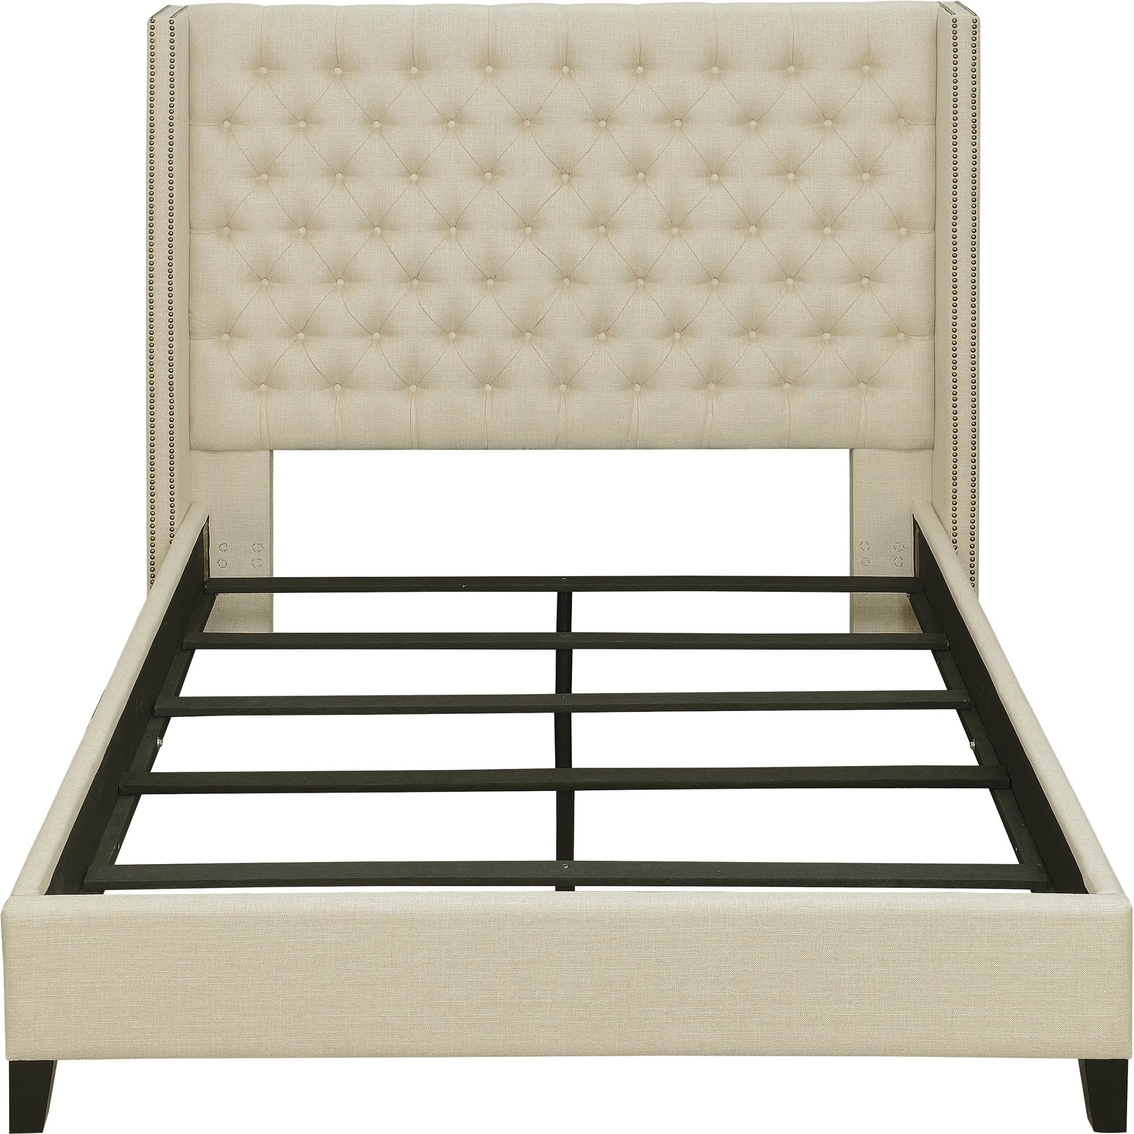 Coaster Benicia Tufted Upholstered Bed - Image 2 of 4